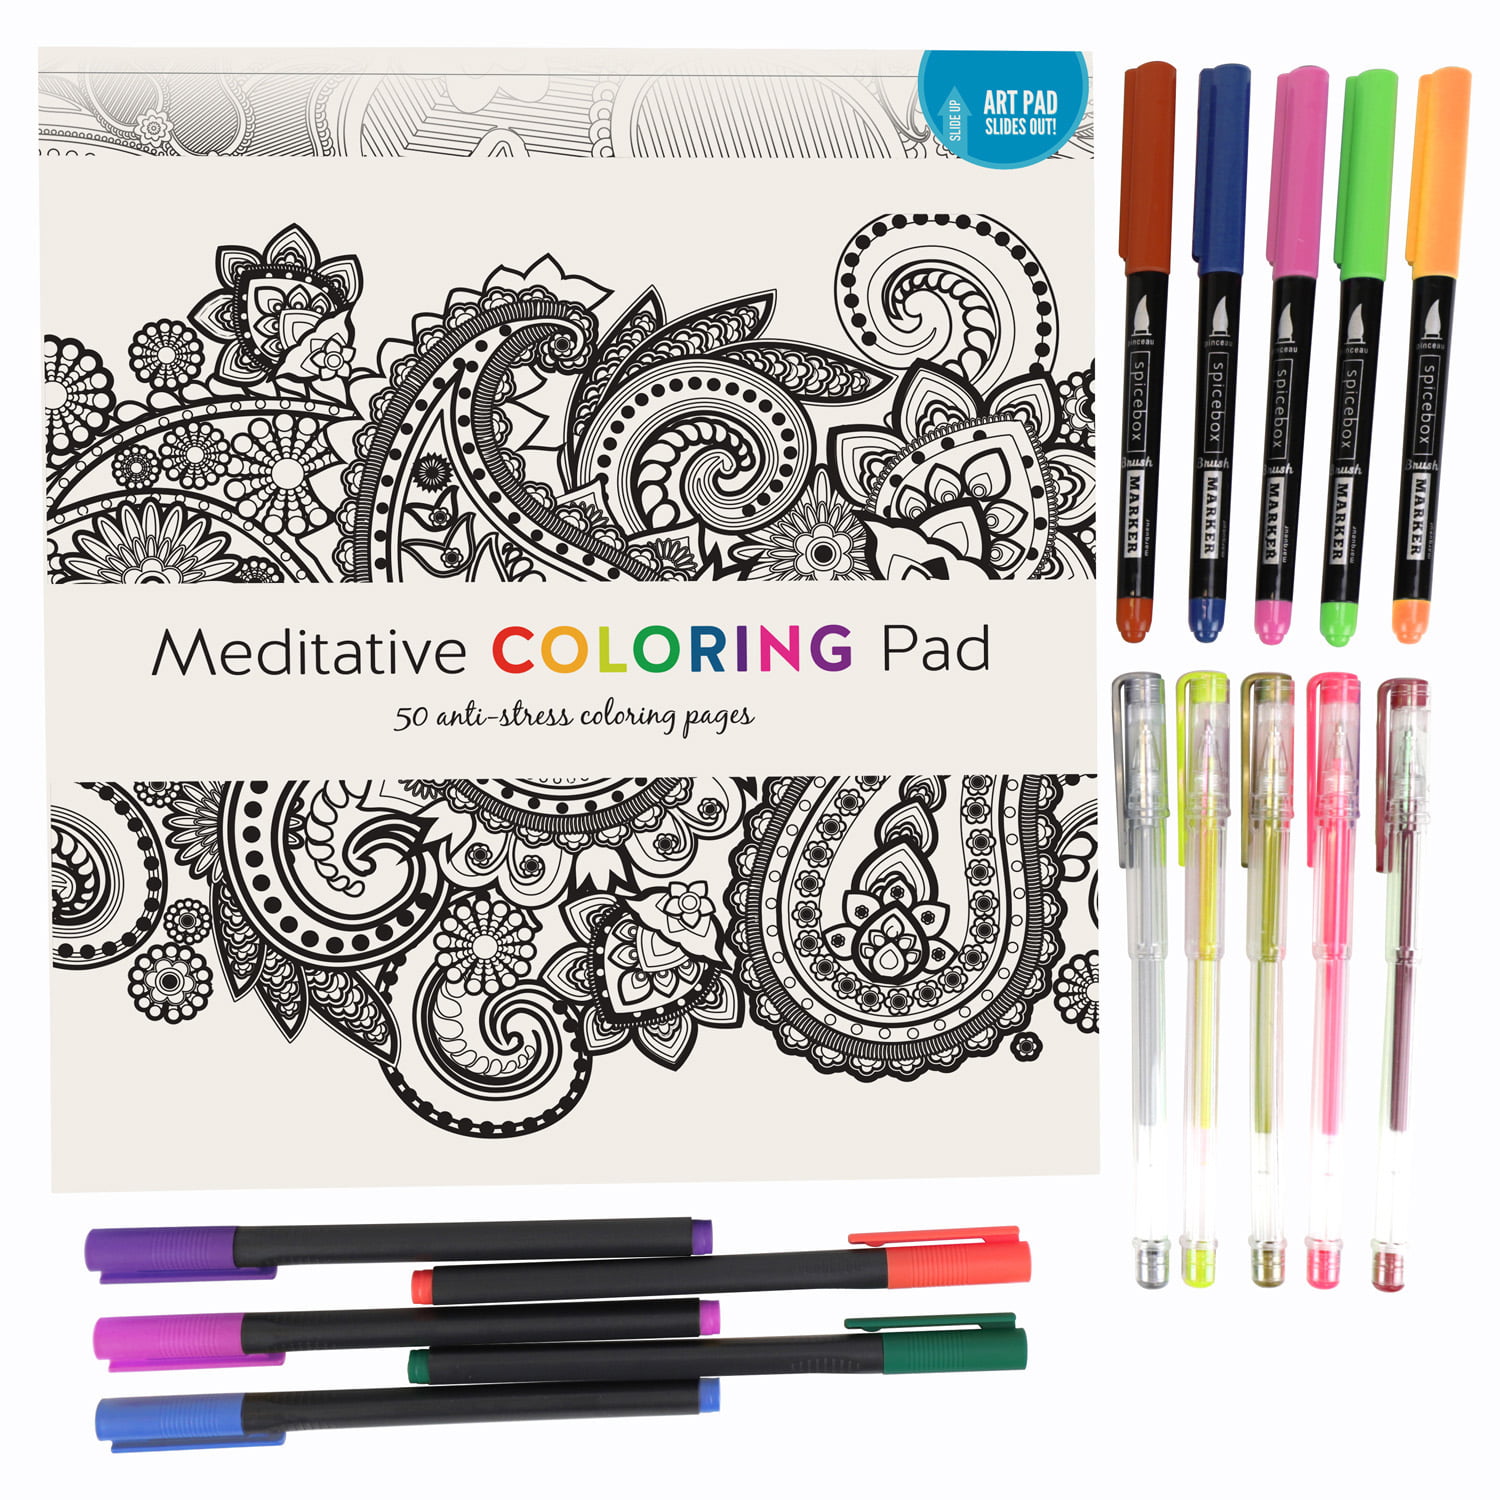 SpiceBox Sketch Plus Deluxe Color Therapy Adult Coloring Kit